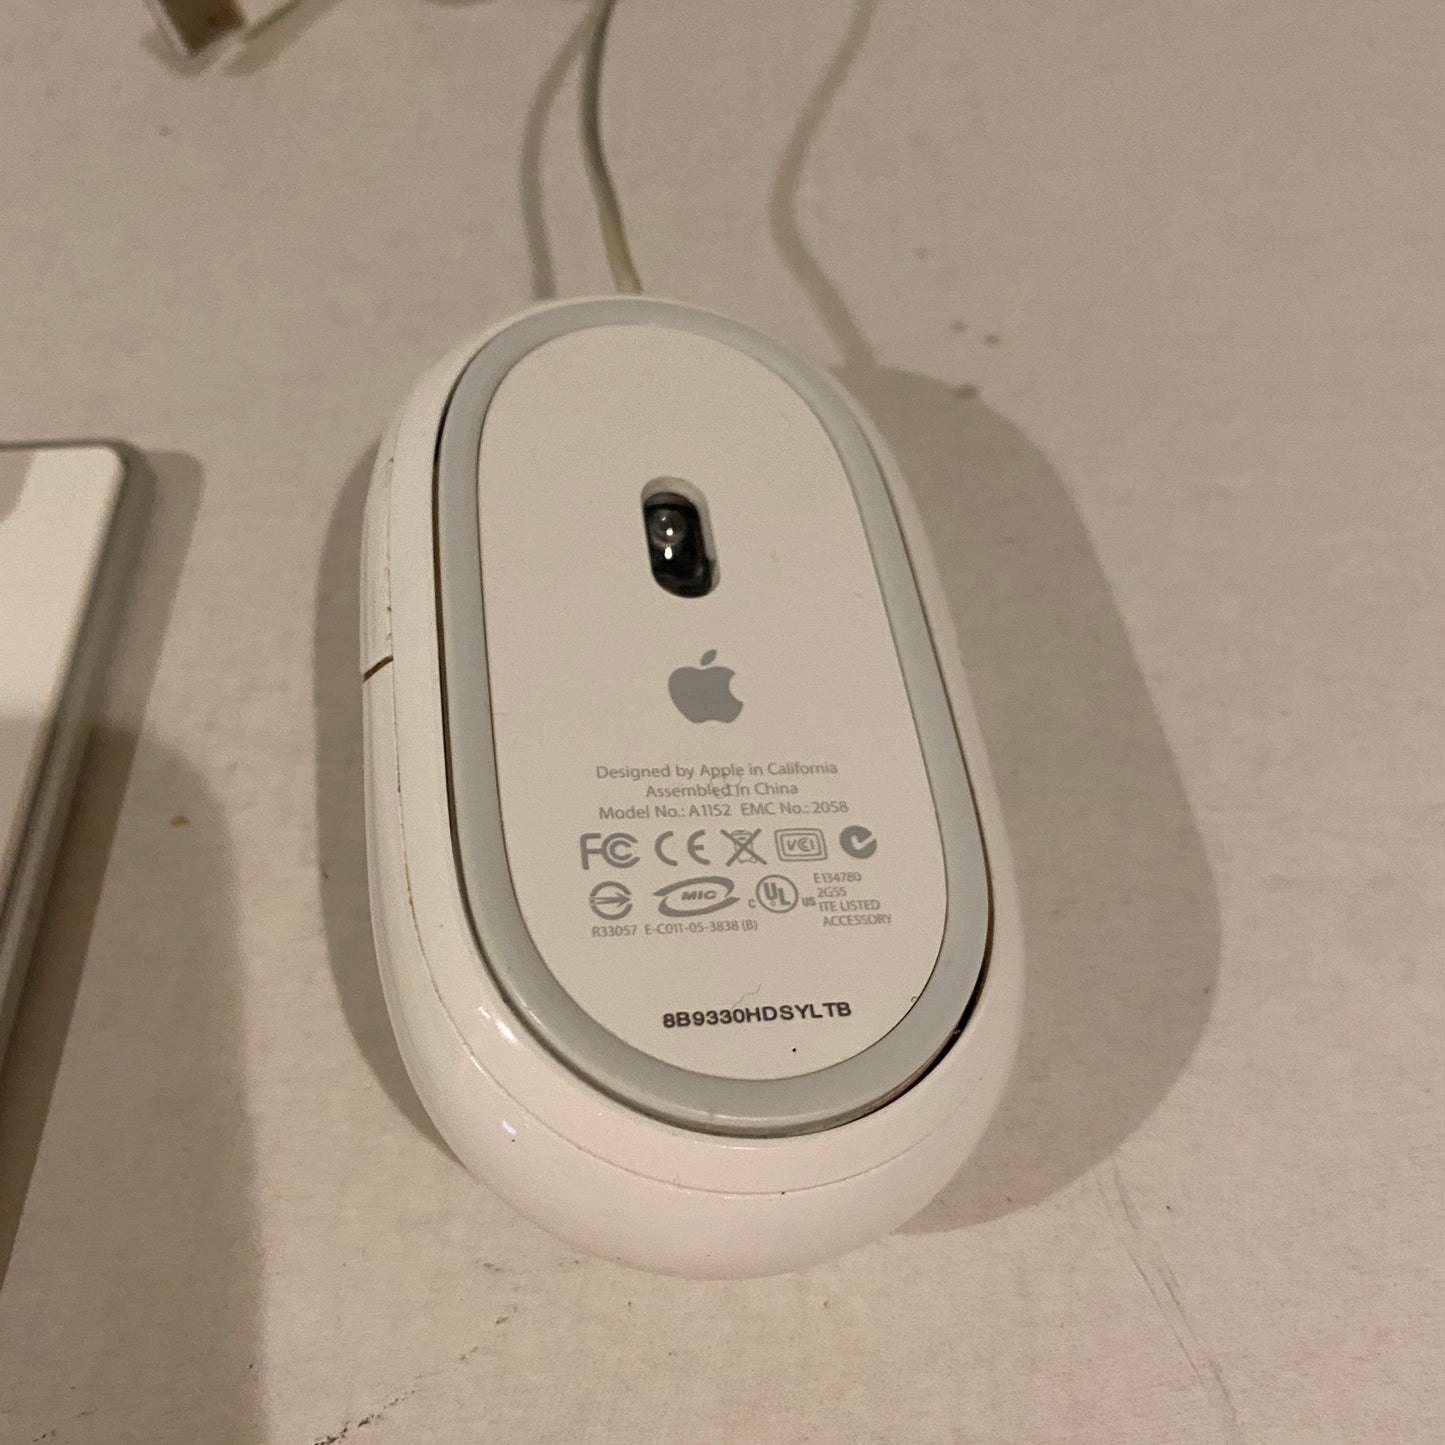 Apple Wired USB Keyboard and Wired USB Mighty Mouse - A1242 A1152